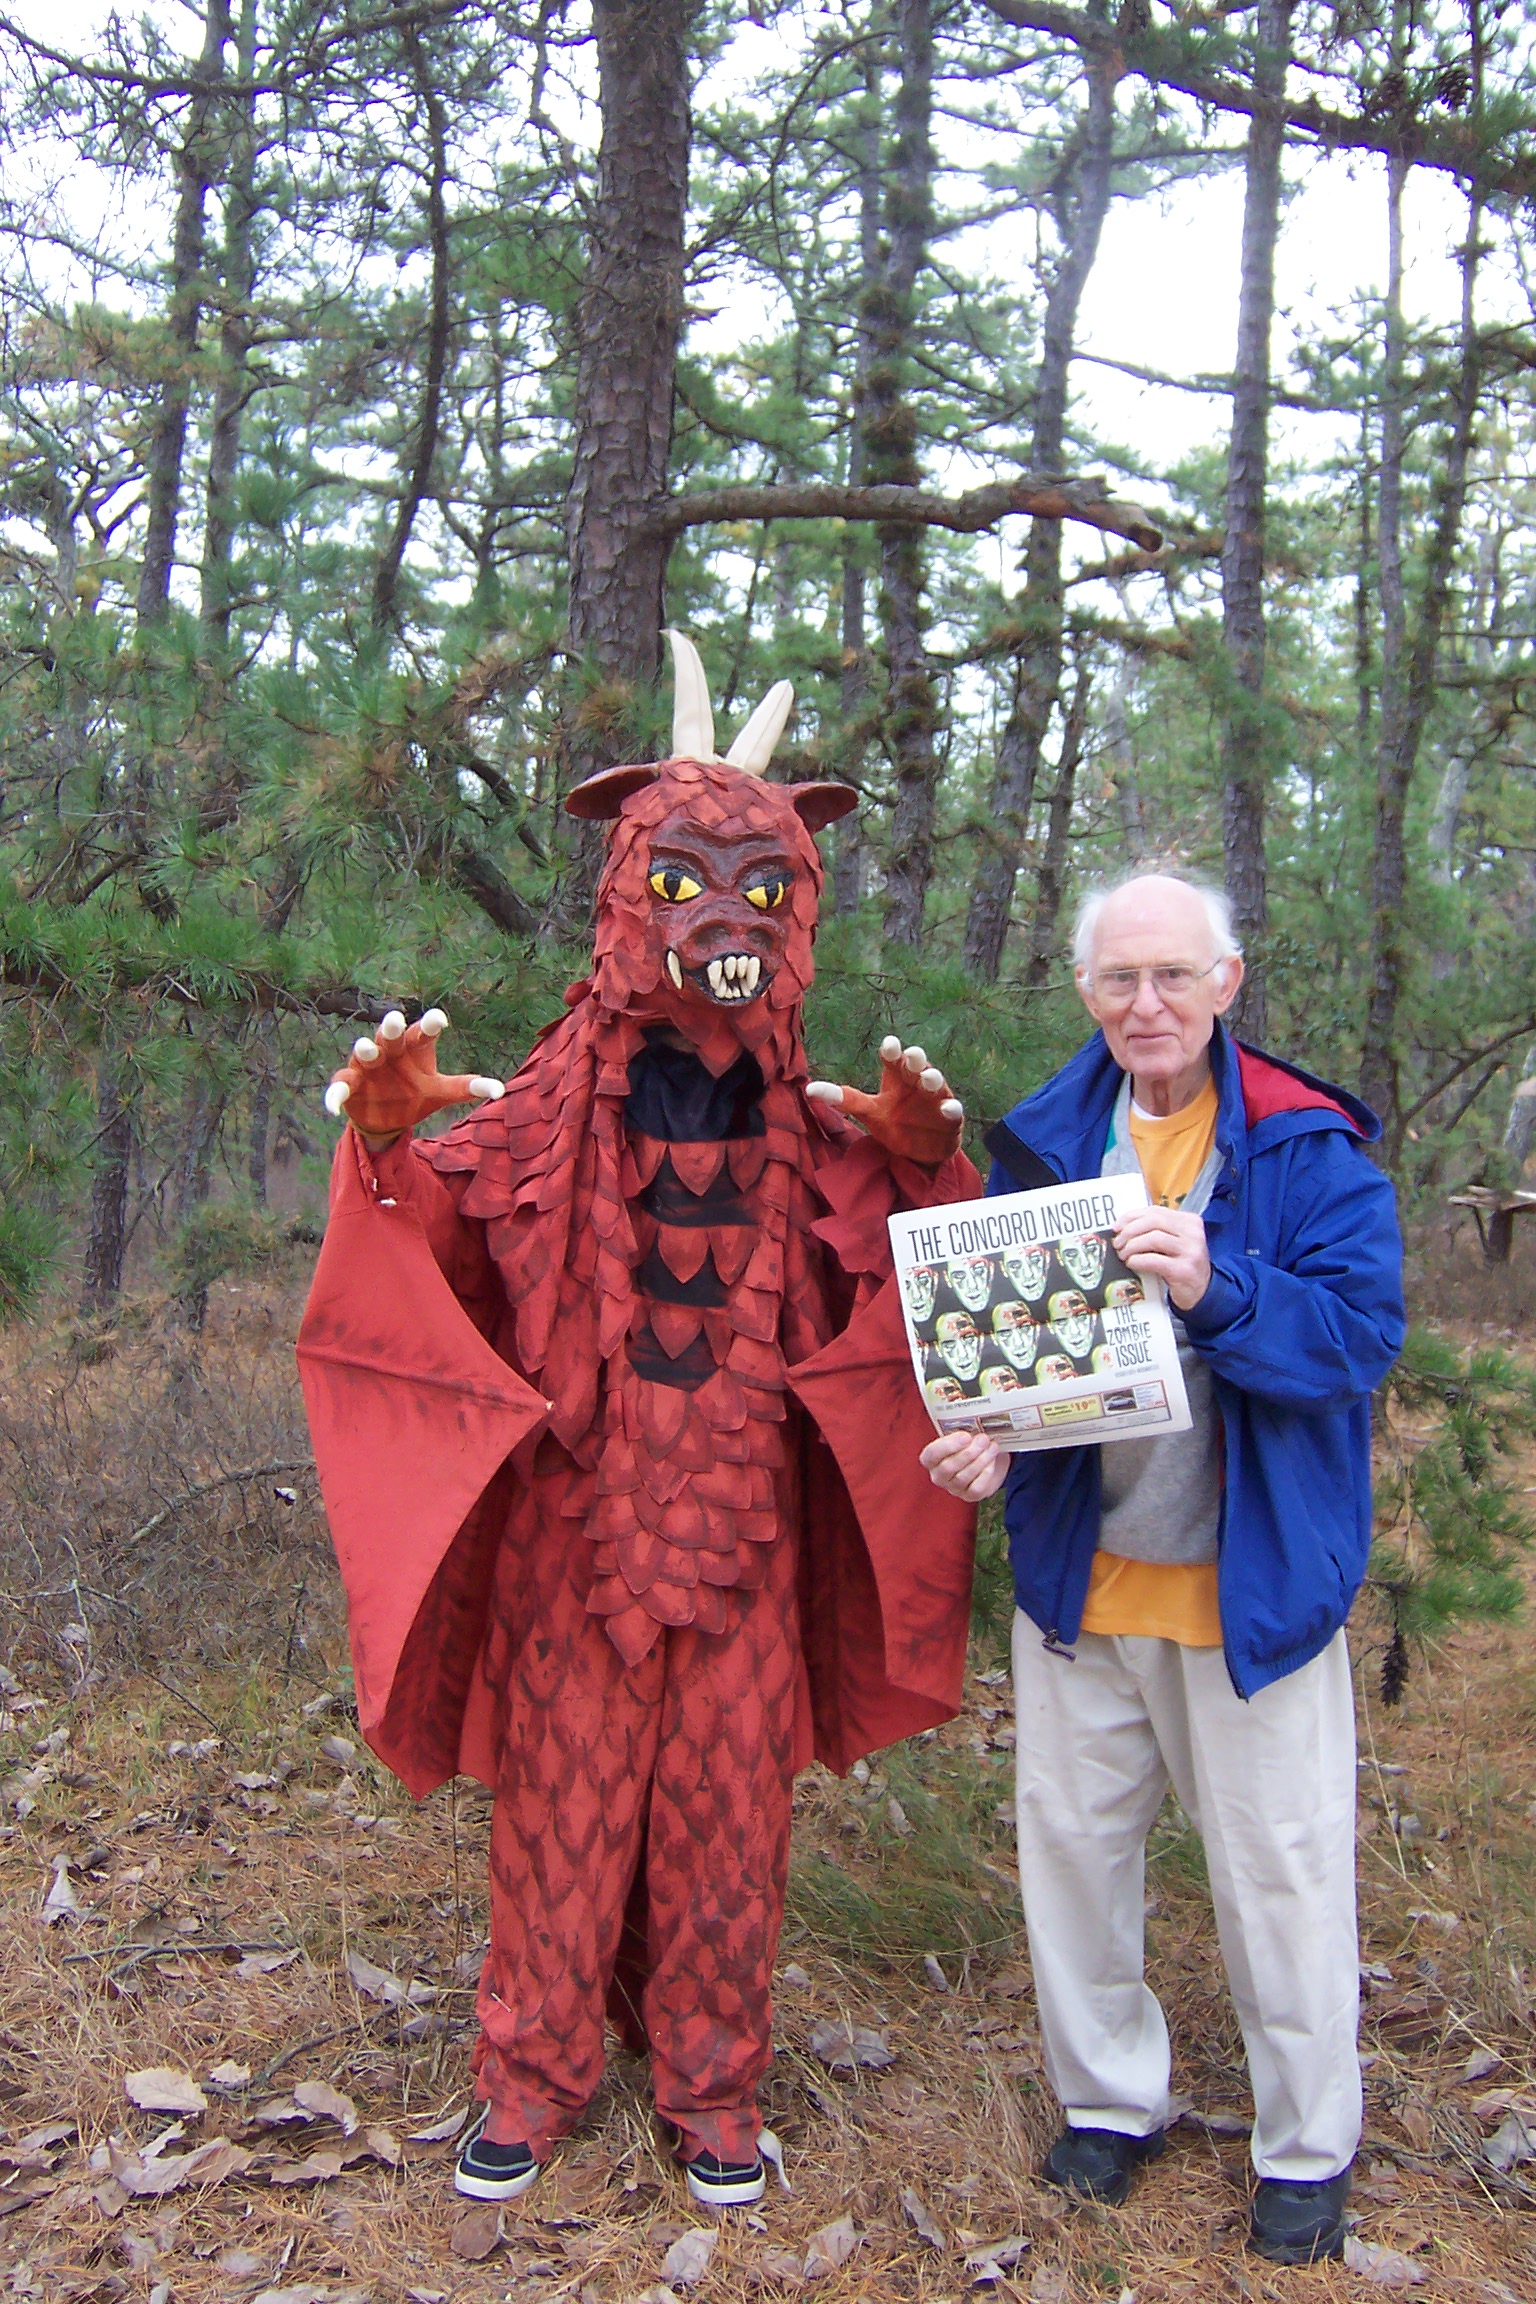 13 times the Jersey Devil has been spotted in the Garden State 